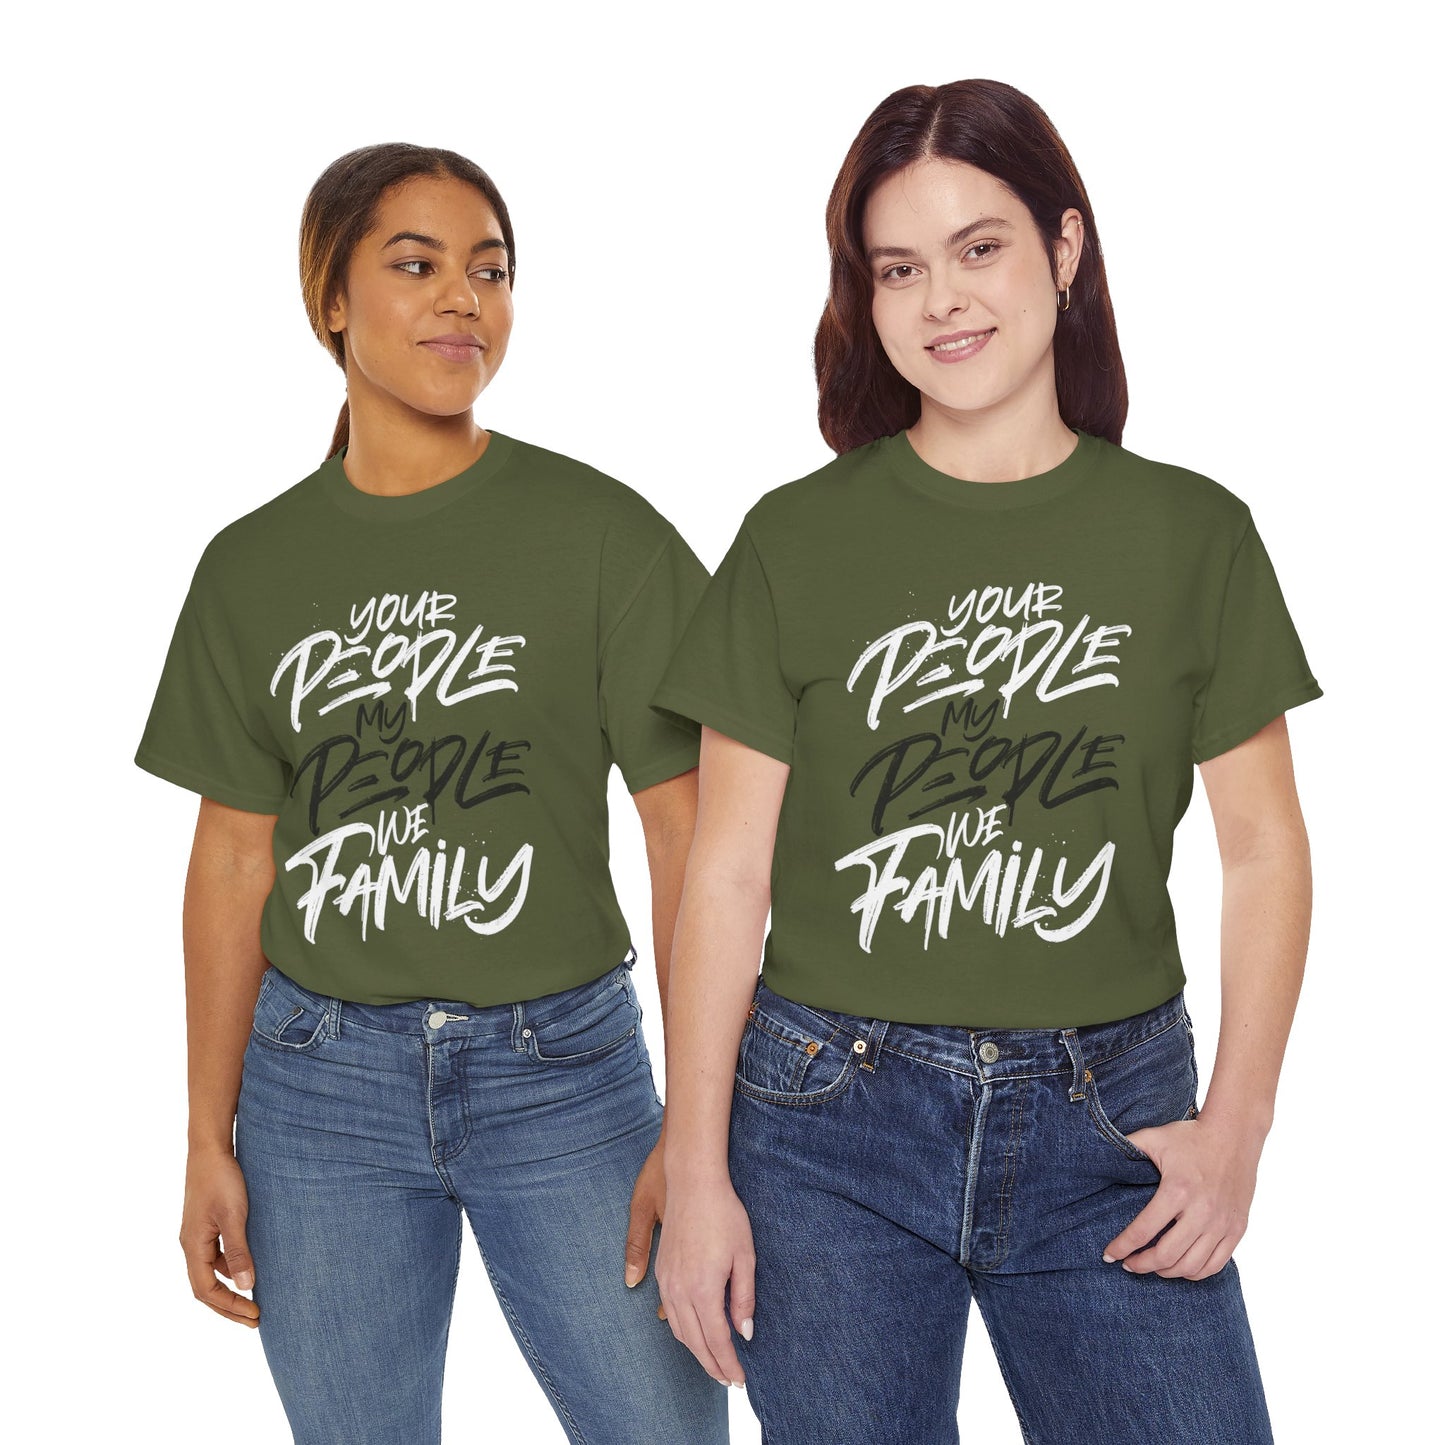 Your People My People Tshirt (black and white)